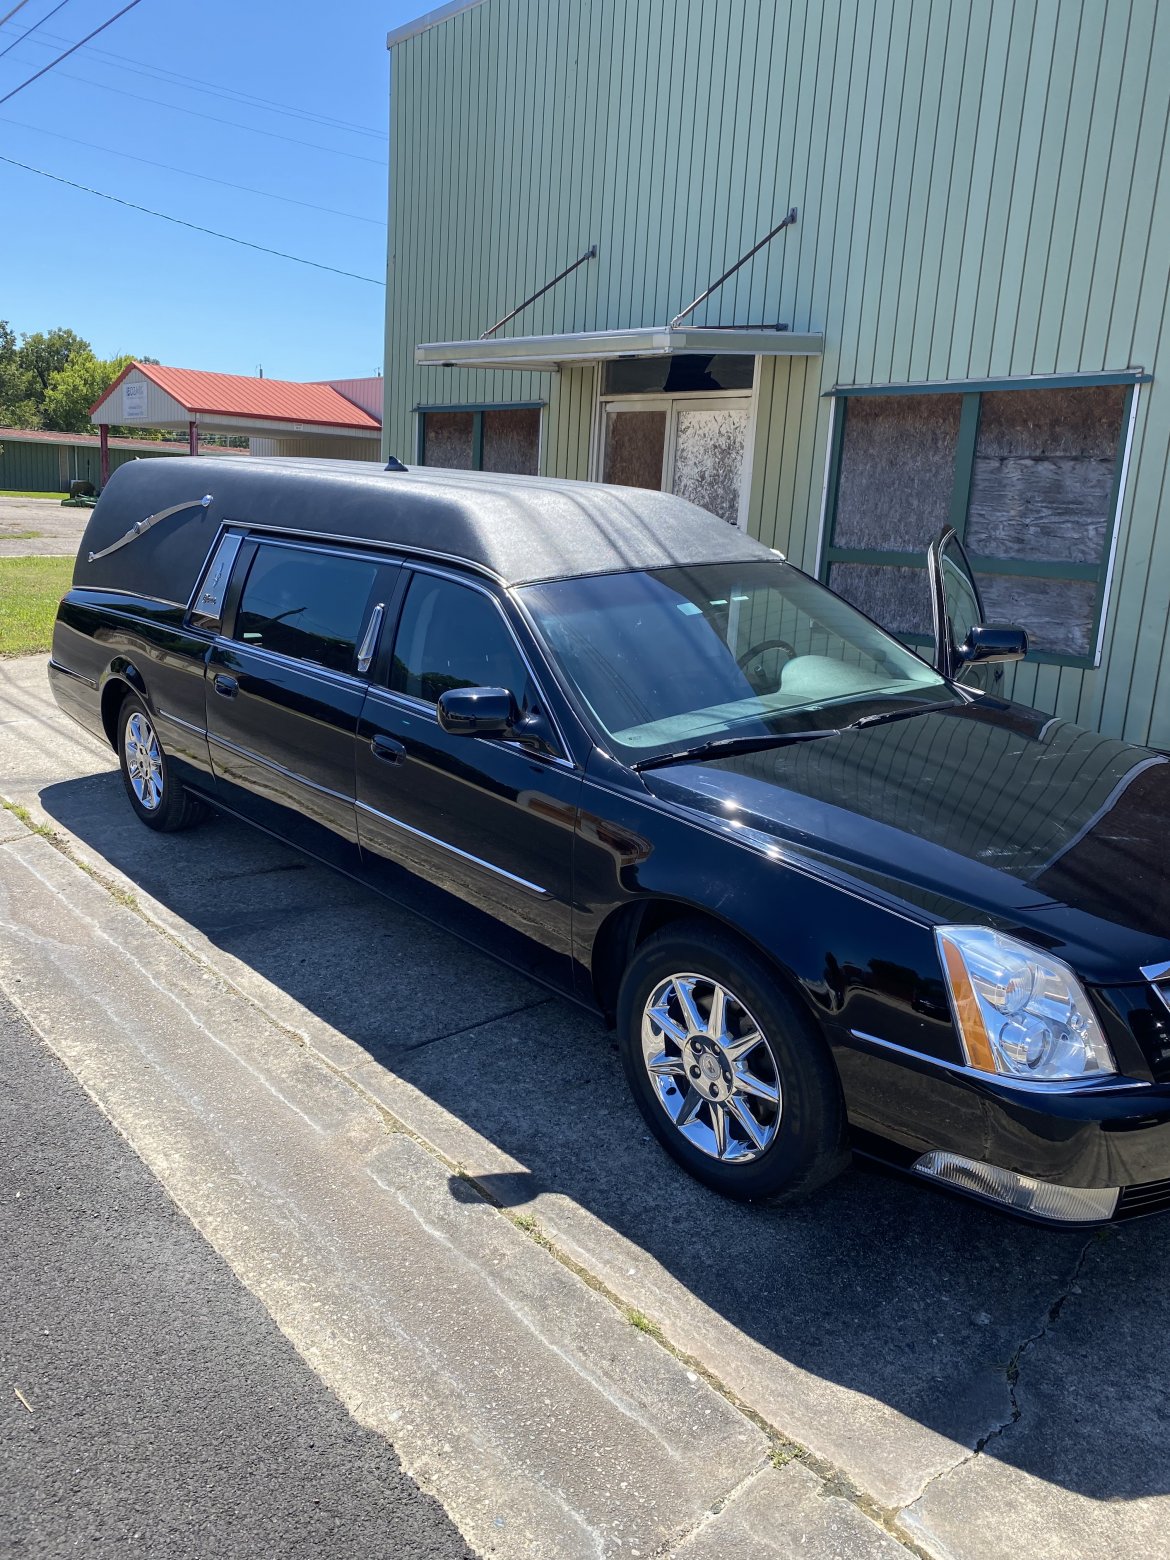 Funeral for sale: 2011 Cadillac Hearse